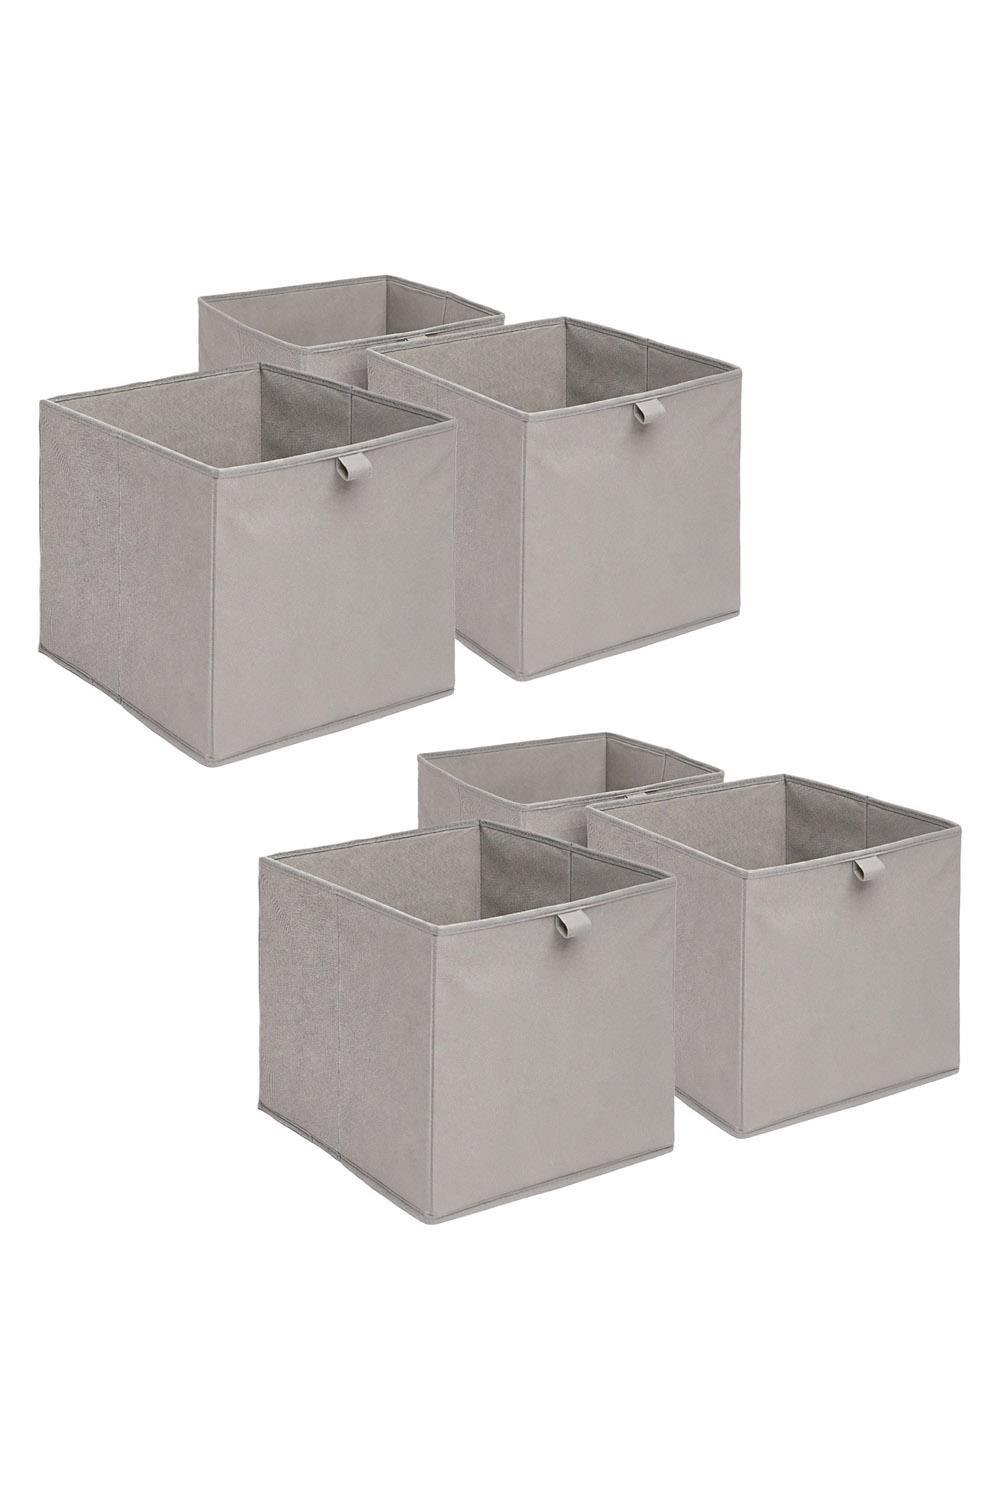 OHS Pack of 6 Plain Folding Cube Storage Boxes|grey